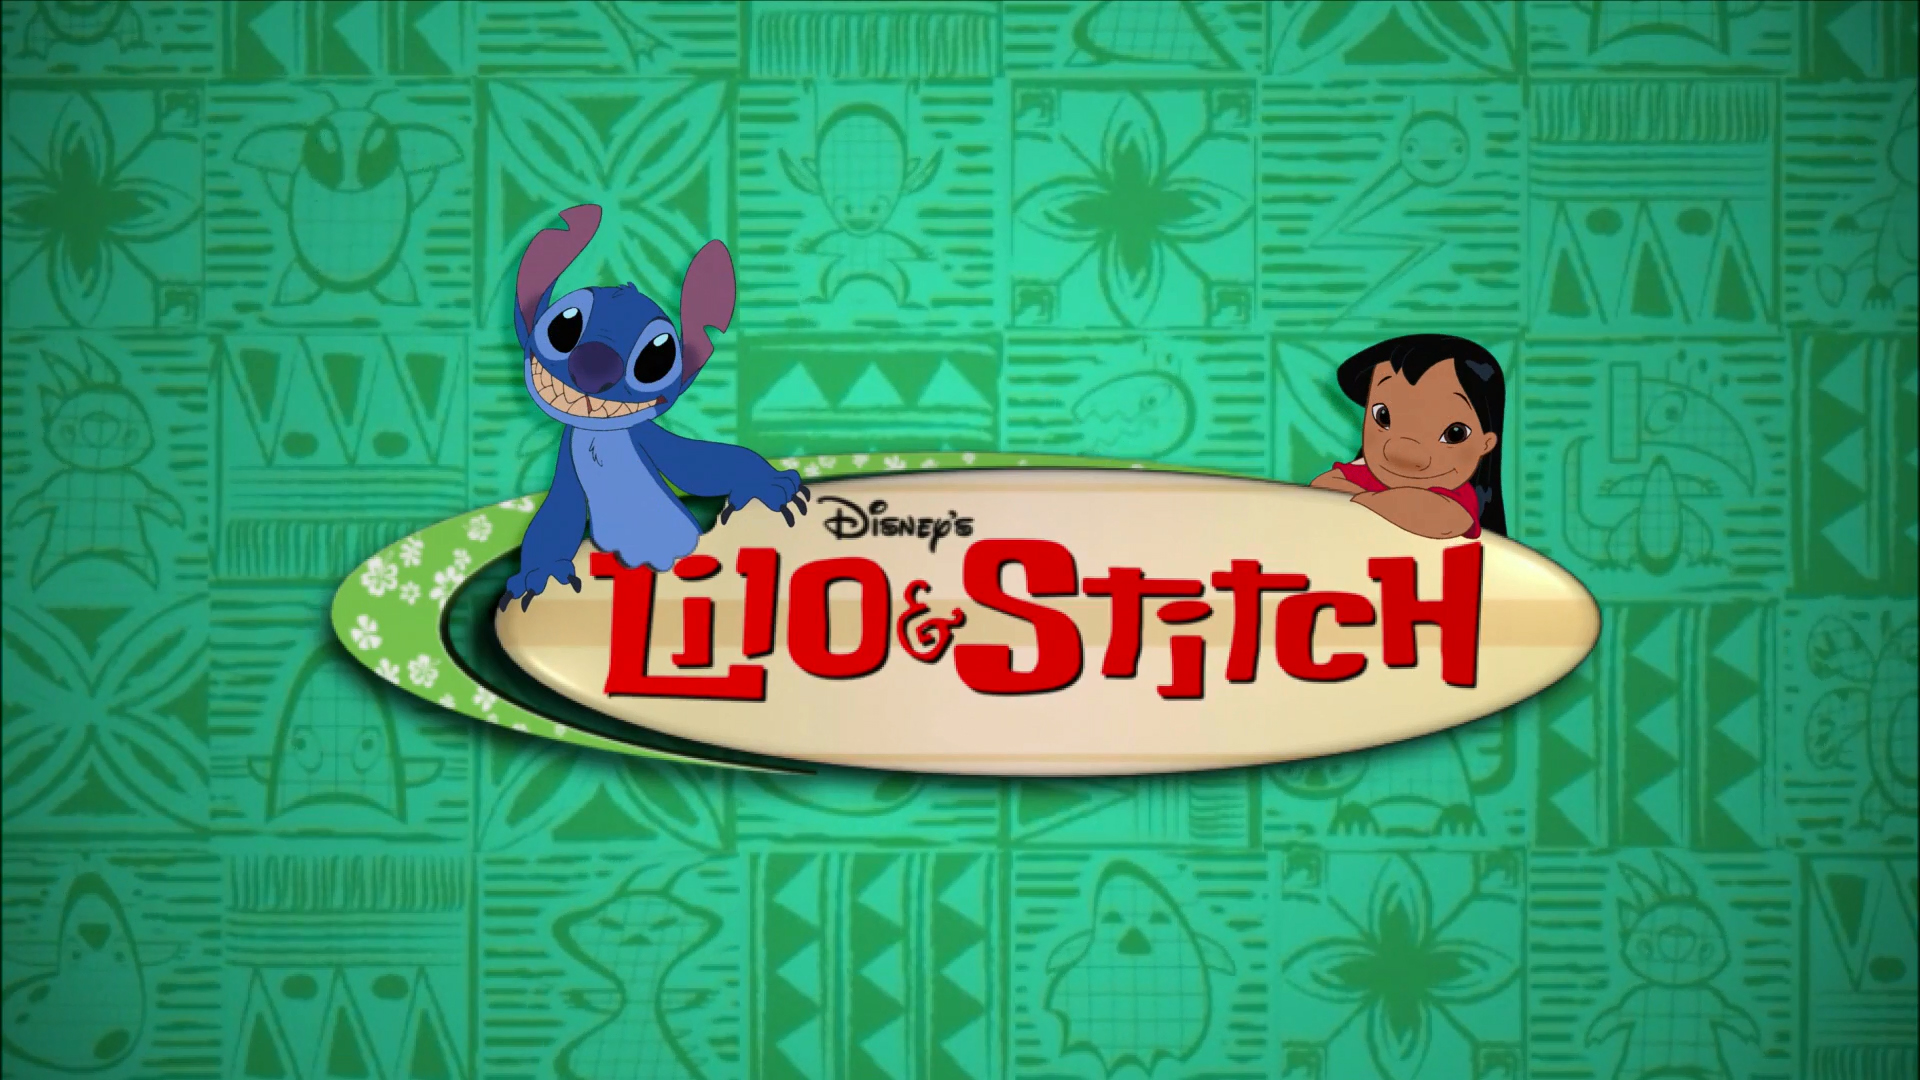 Lilo and Stitch' Gets a Rumored Release Date as Disney Doubles